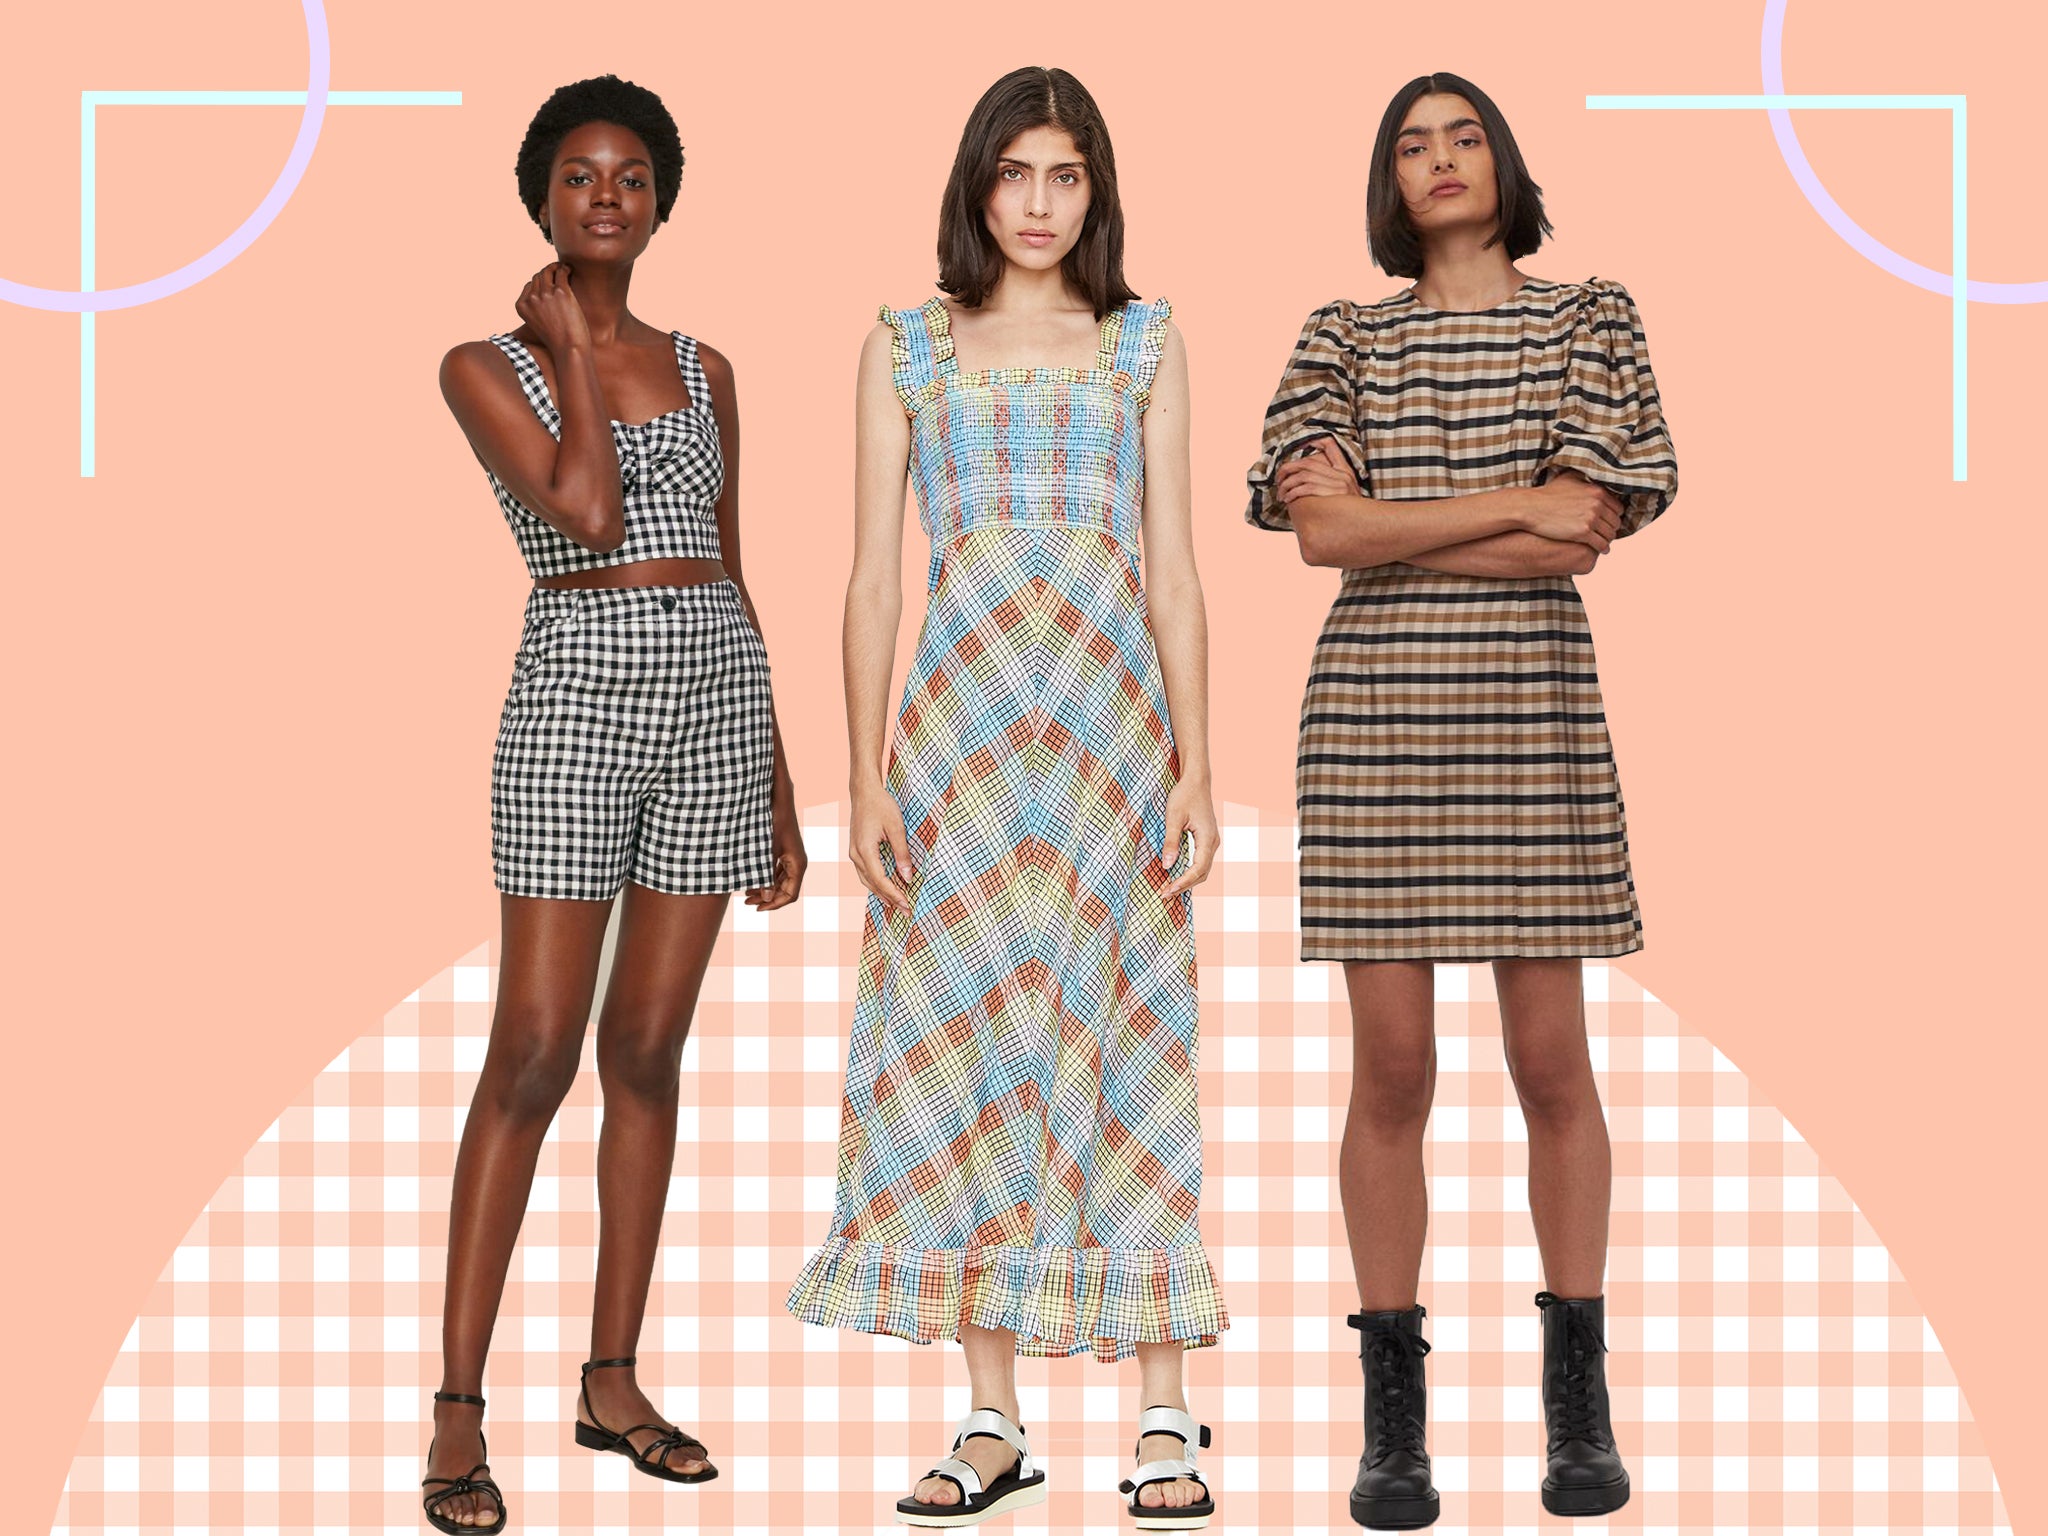 Much like florals and polka dots, this check print is everywhere